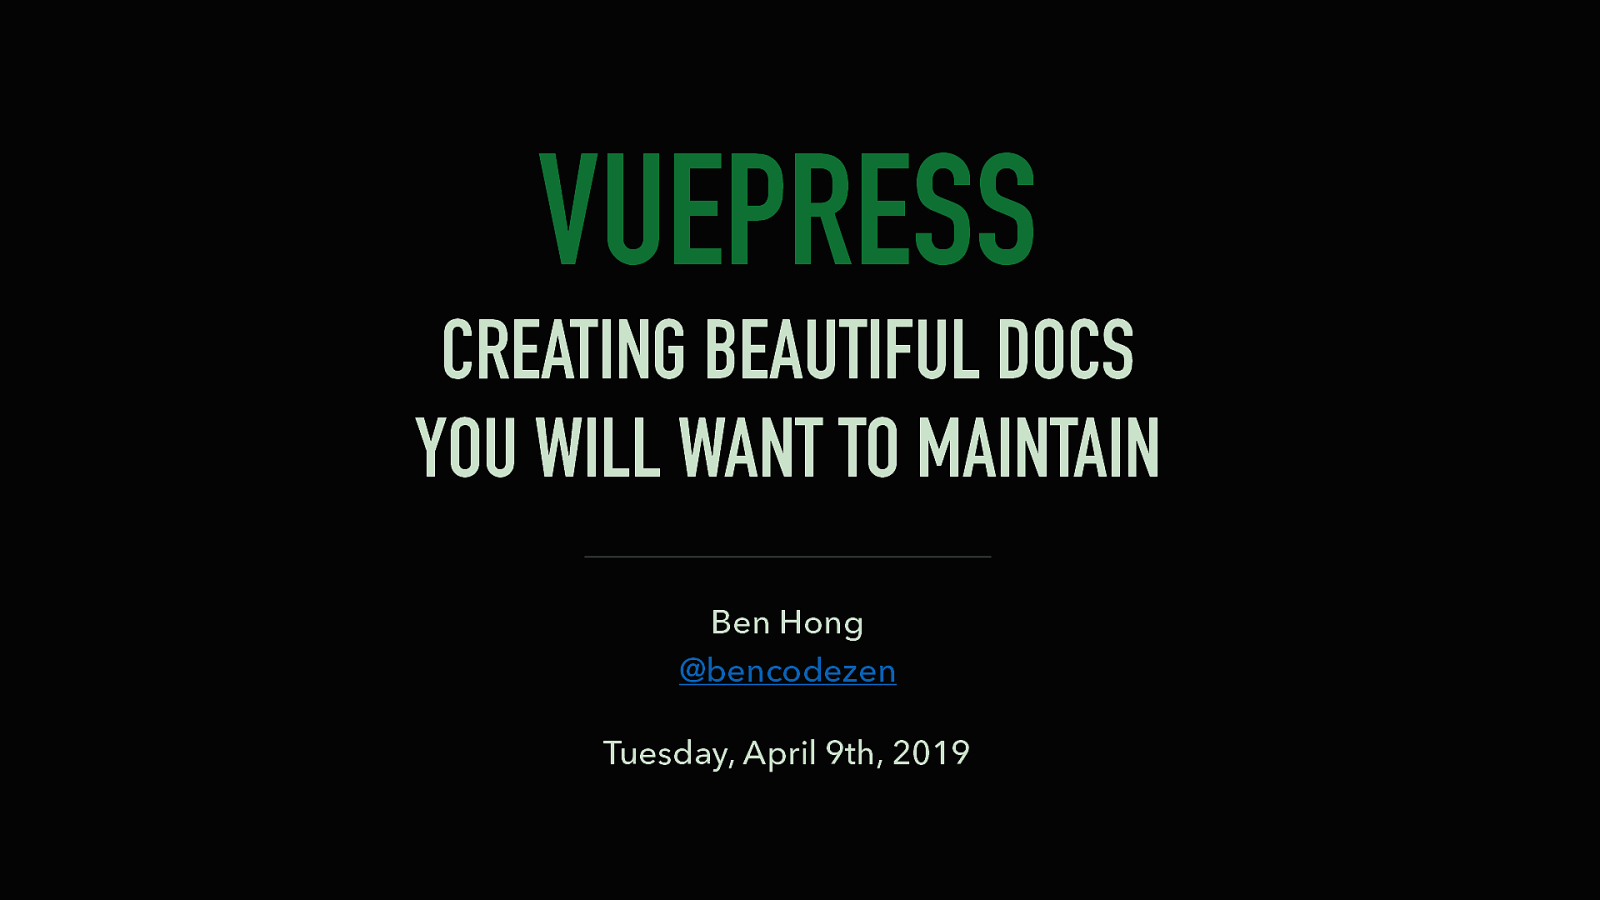 VuePress: Creating Beautiful Docs You Will Want to Maintain